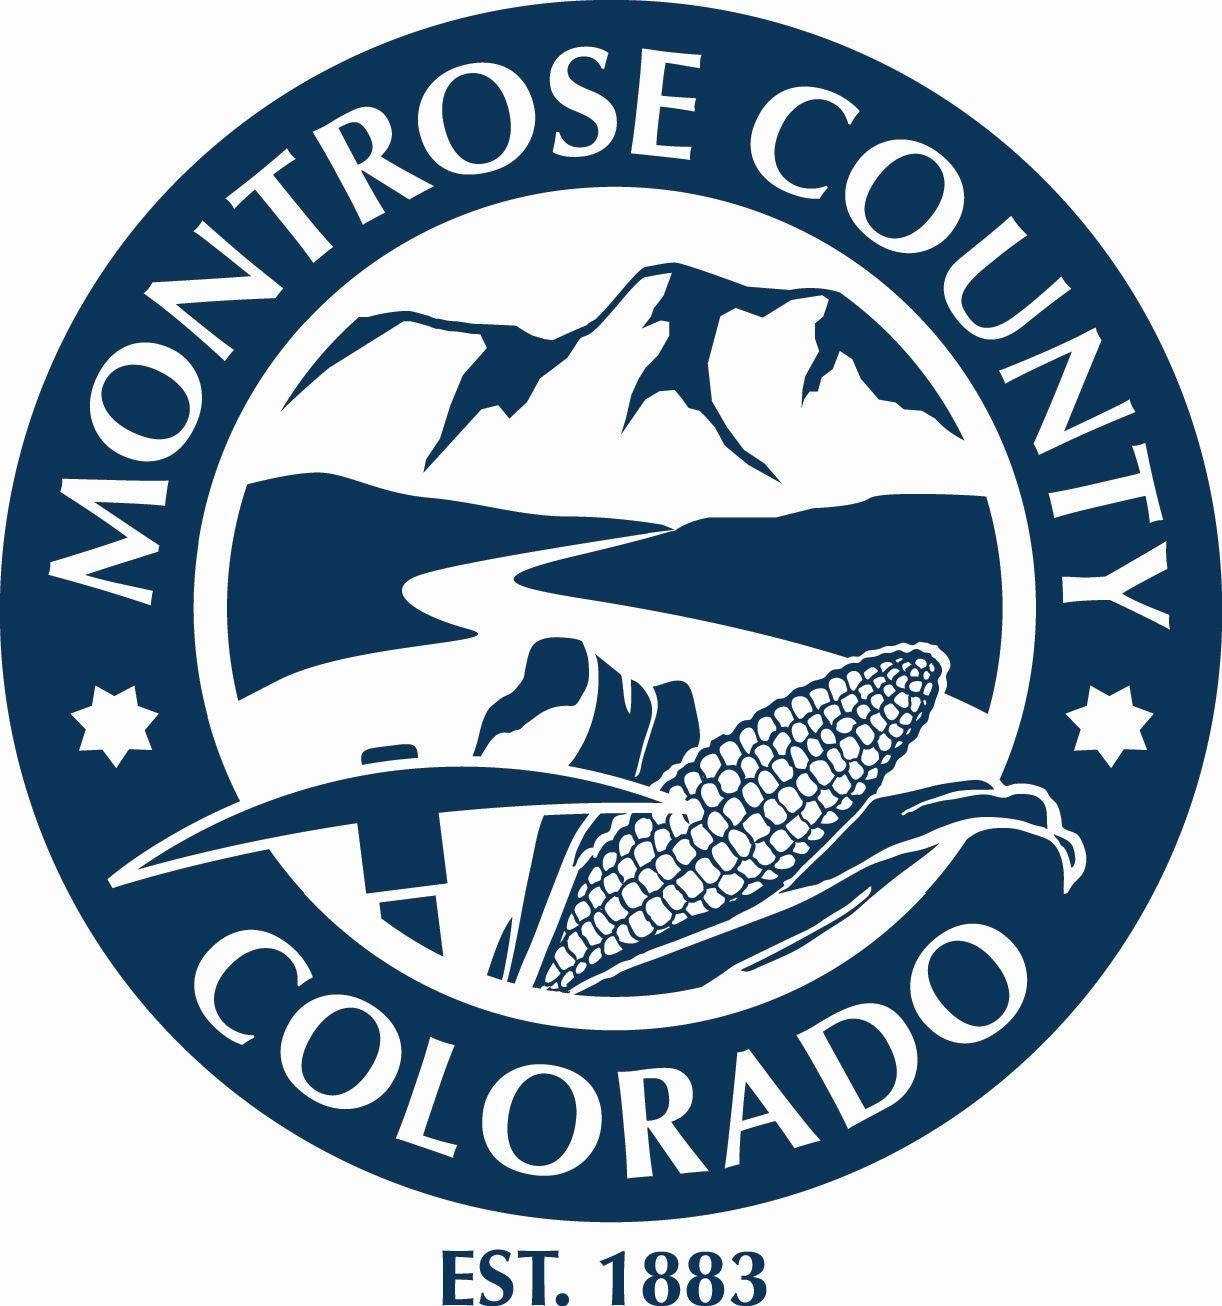 County Logo - Montrose County - Official Website